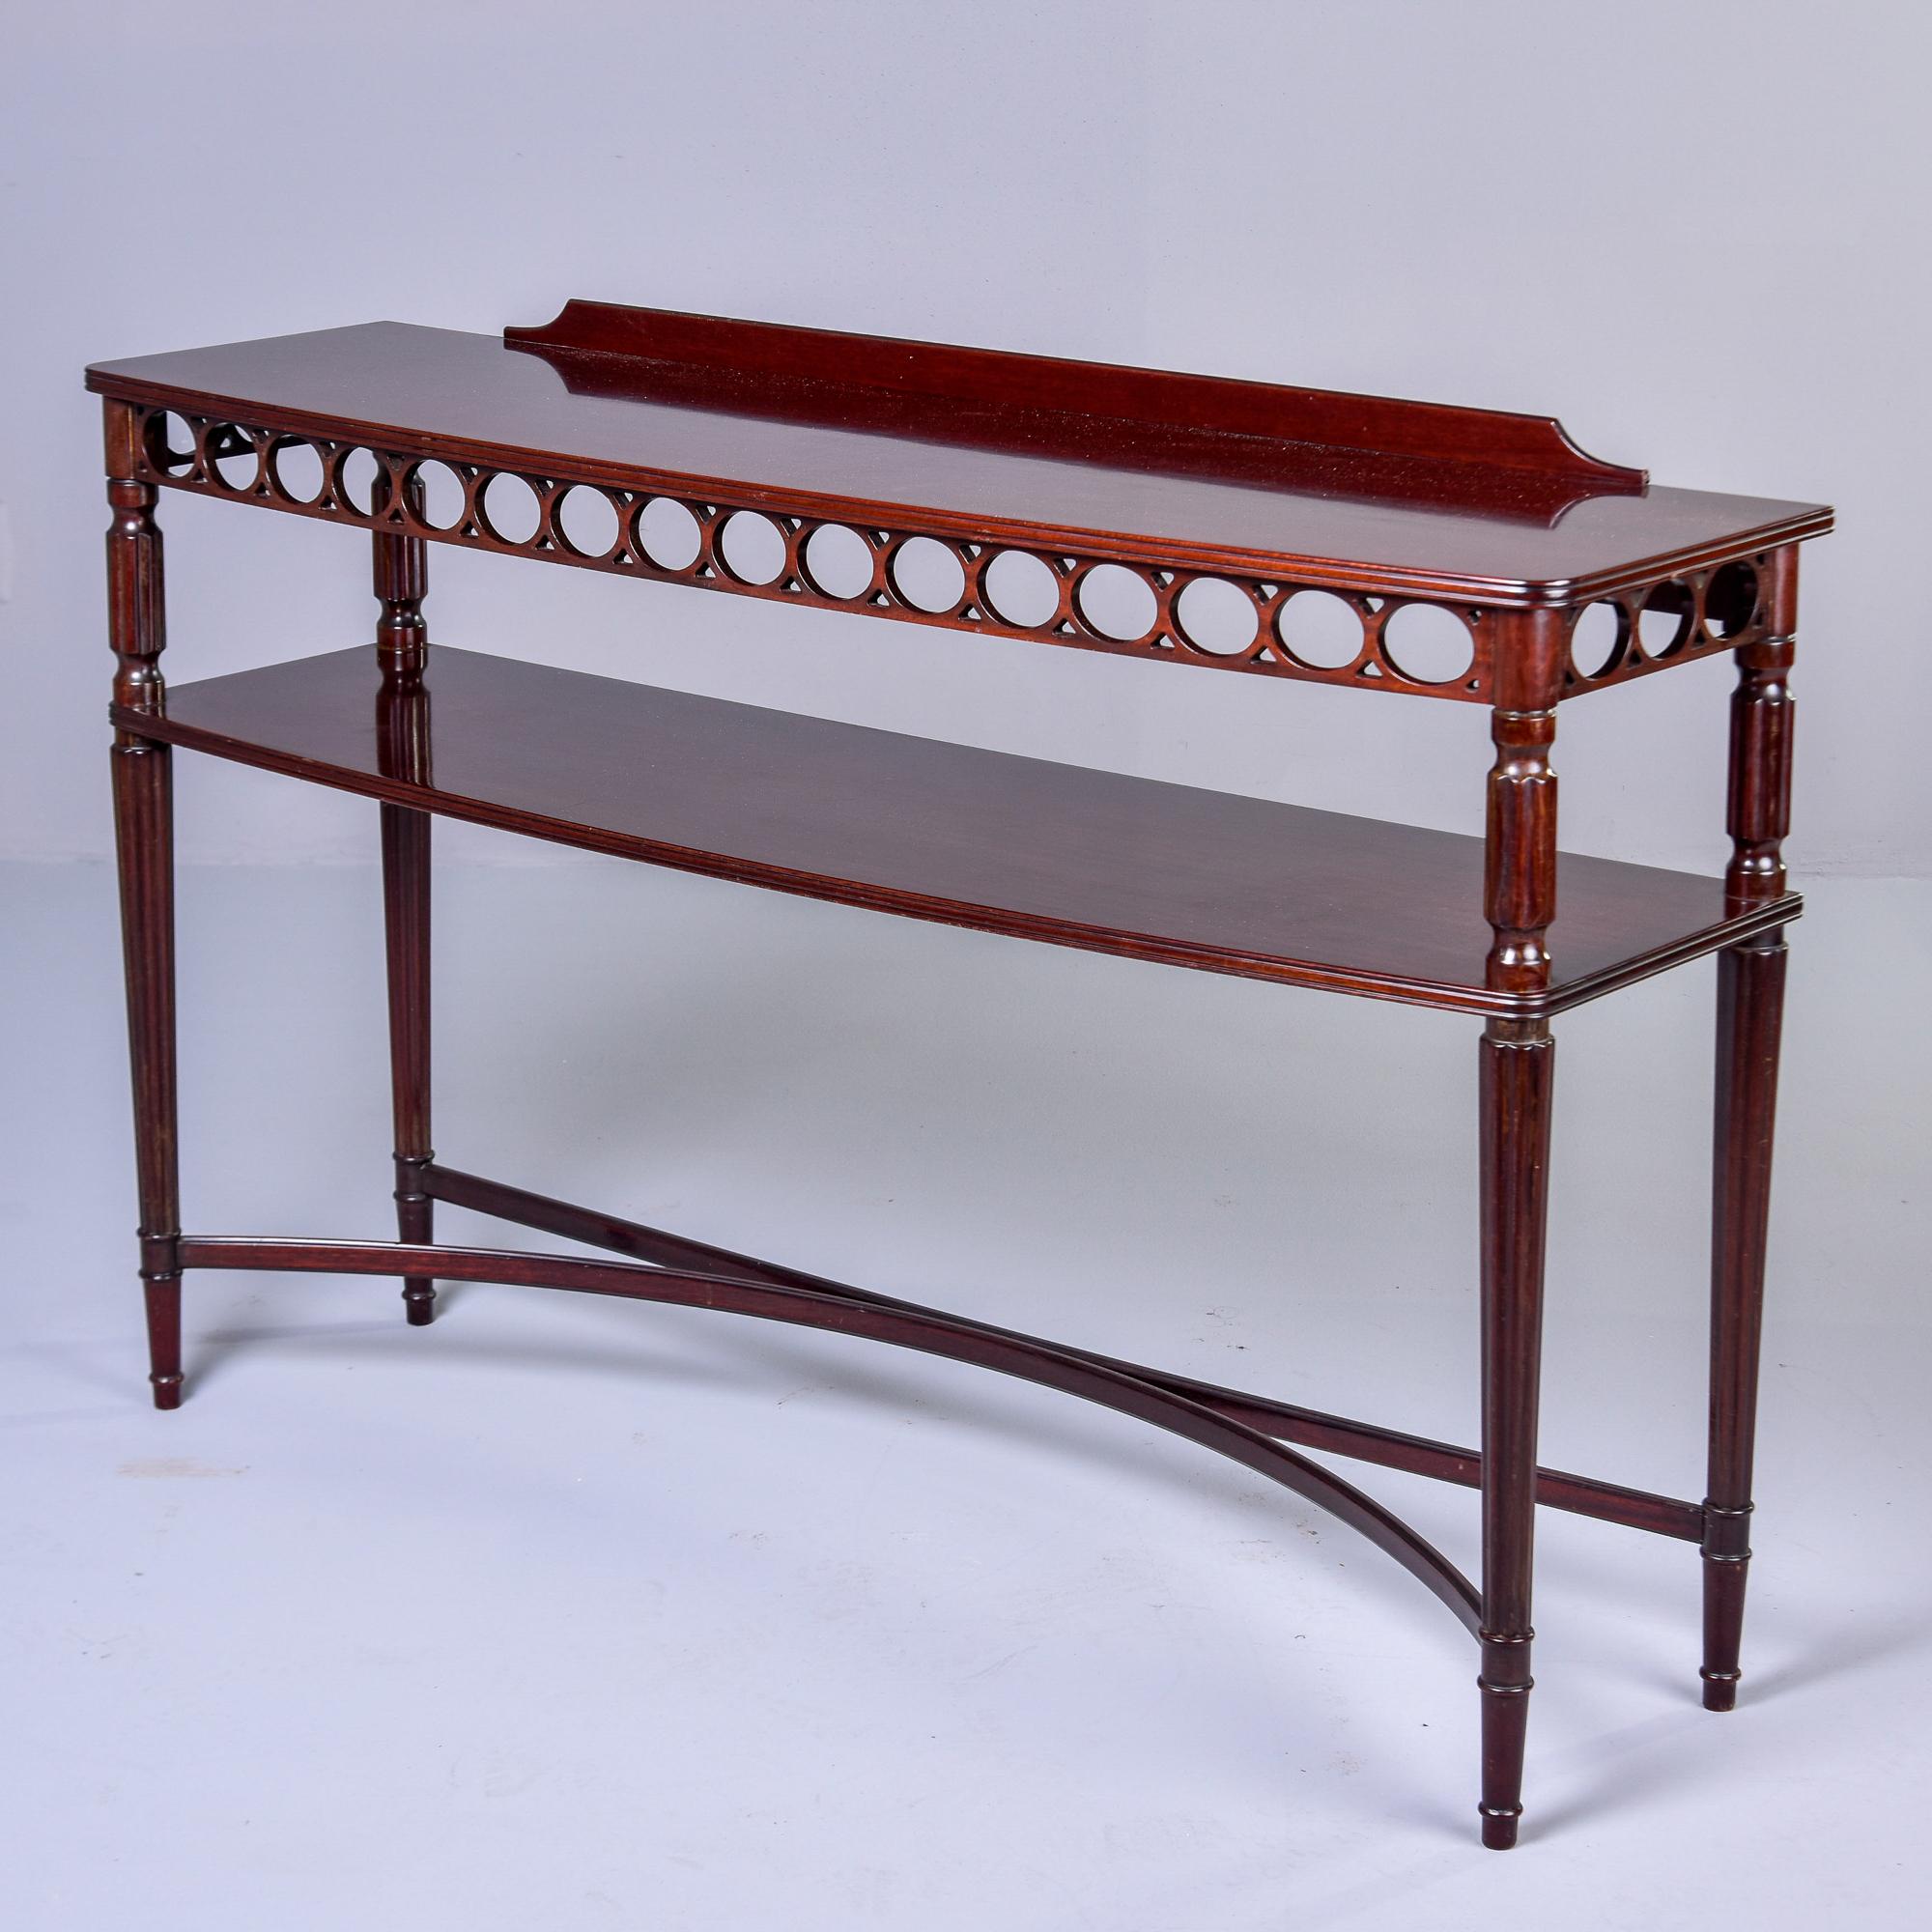 Found in England, this slender two tier mahogany console dates from the 1930s. Table top has a low back panel and an apron with open work, circular design. There is a lower tier and four turned and tapered legs supported by curved X-form stretchers.